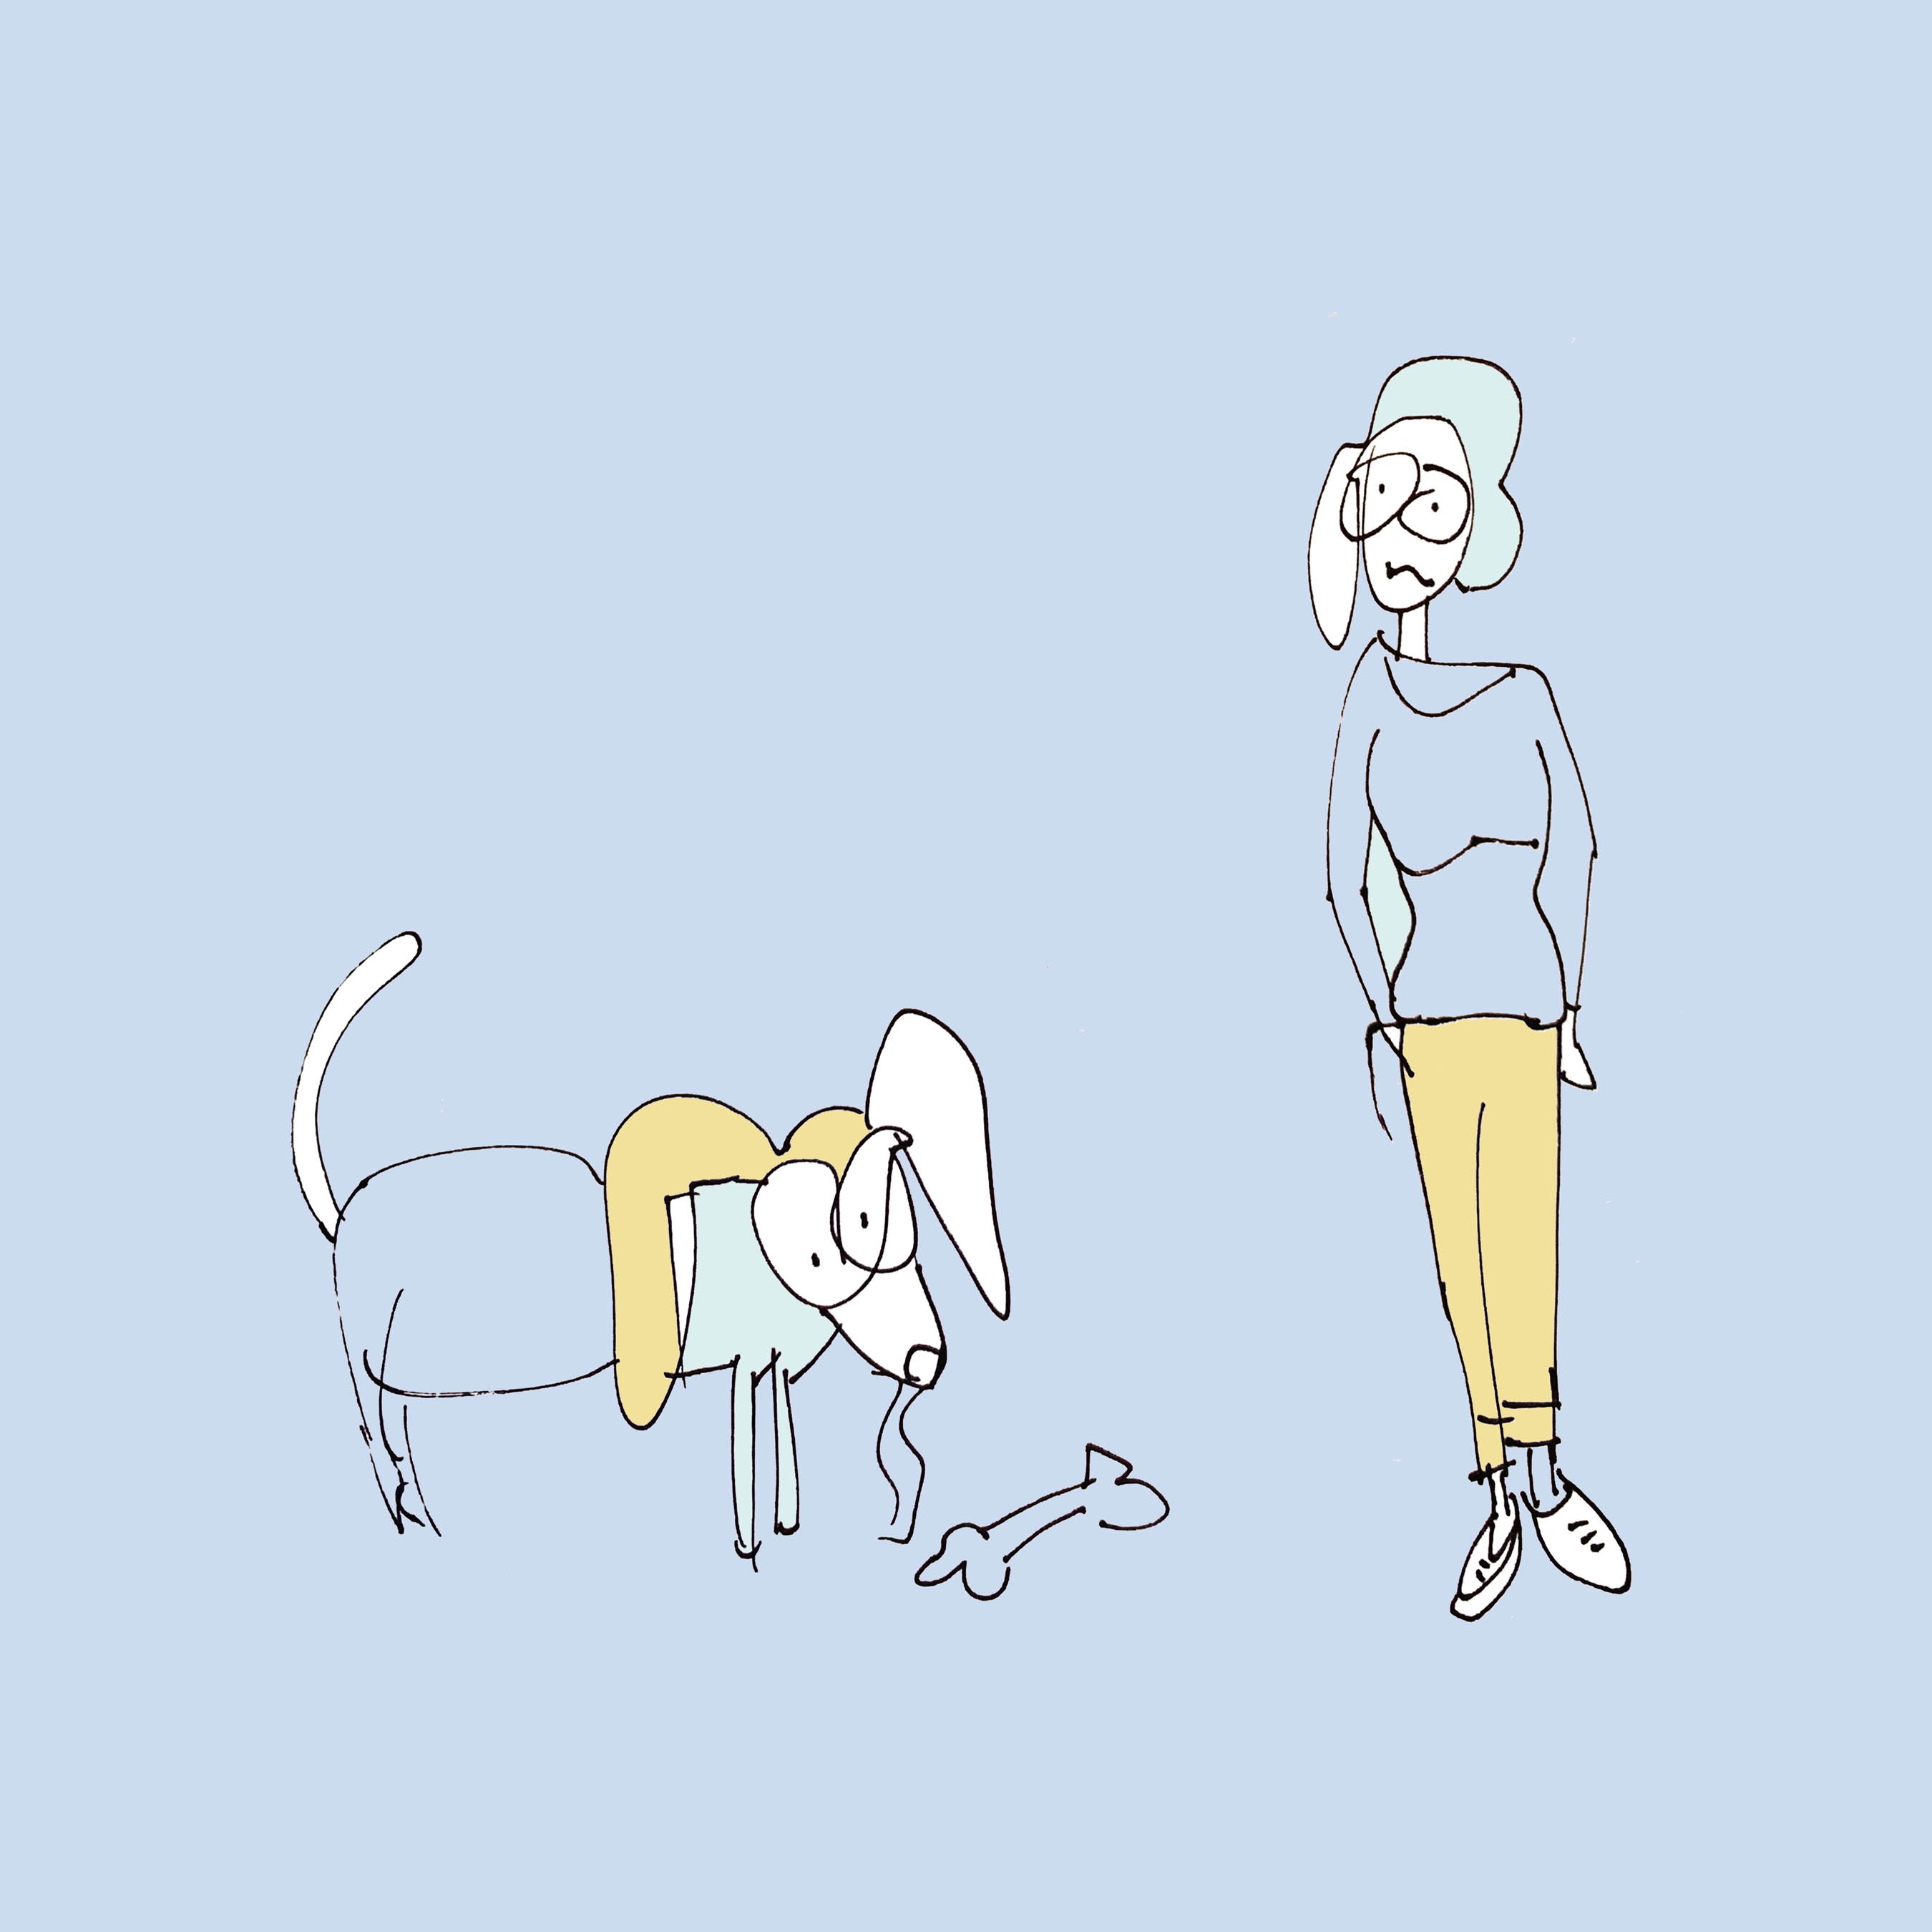 art every day number 619 / illustration / the woman & her dog